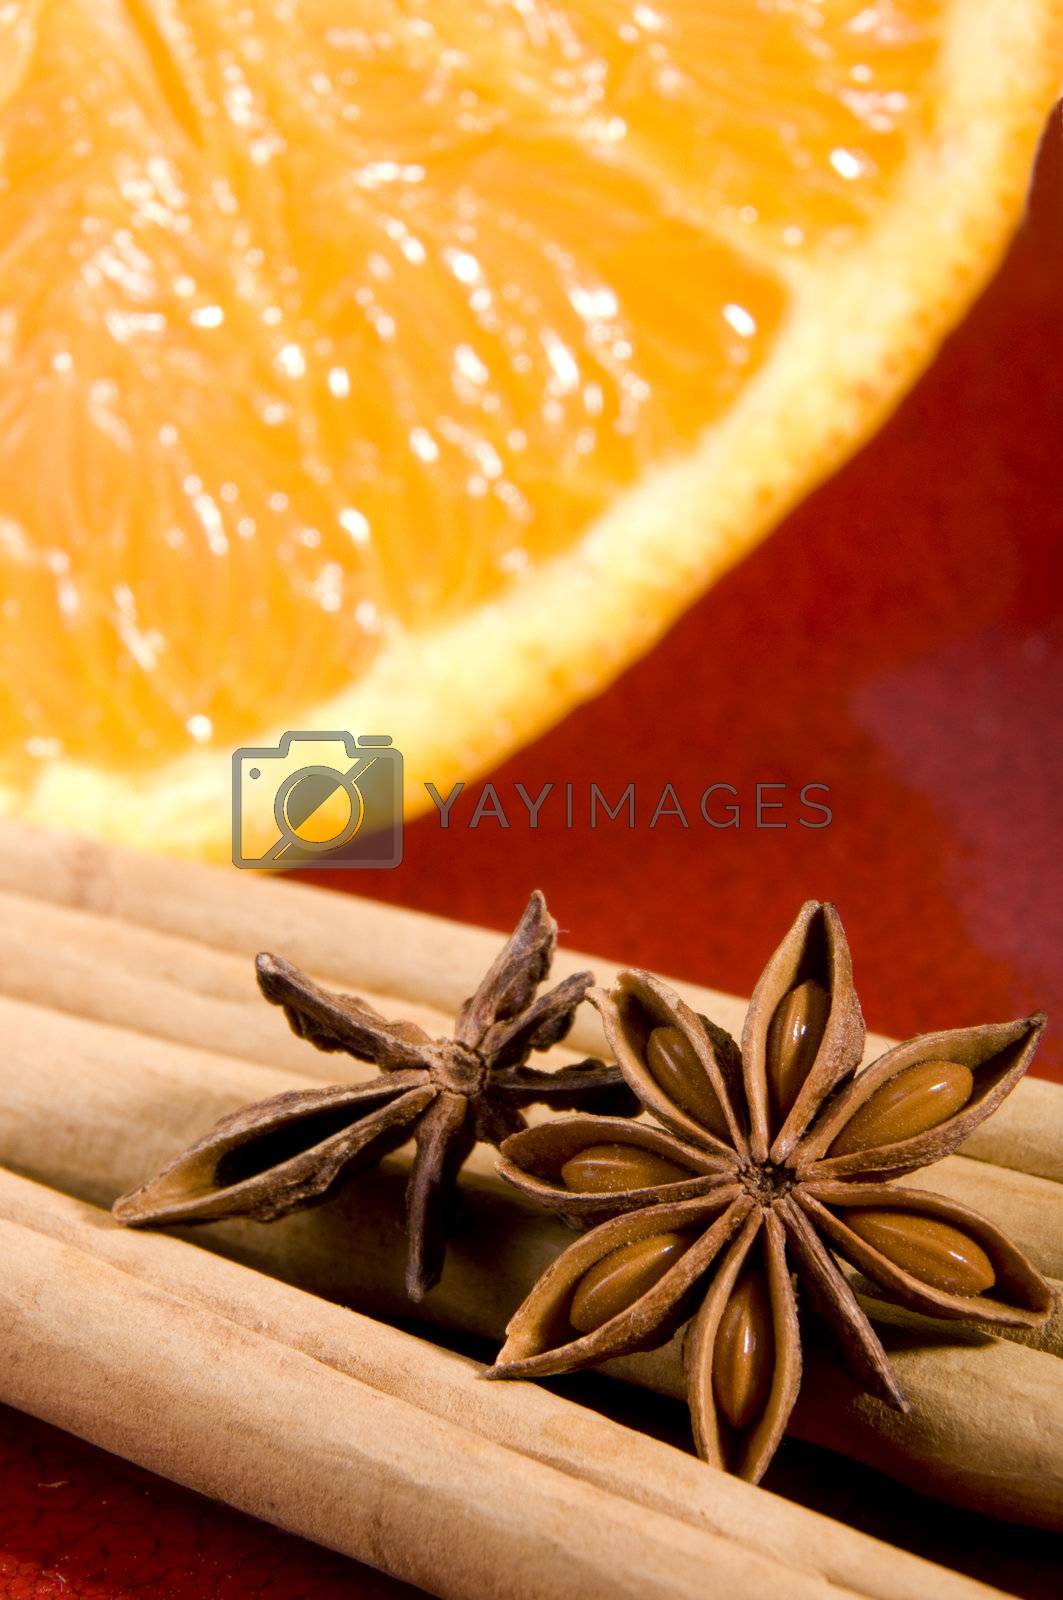 Cinnamon, anise and orange close up composition